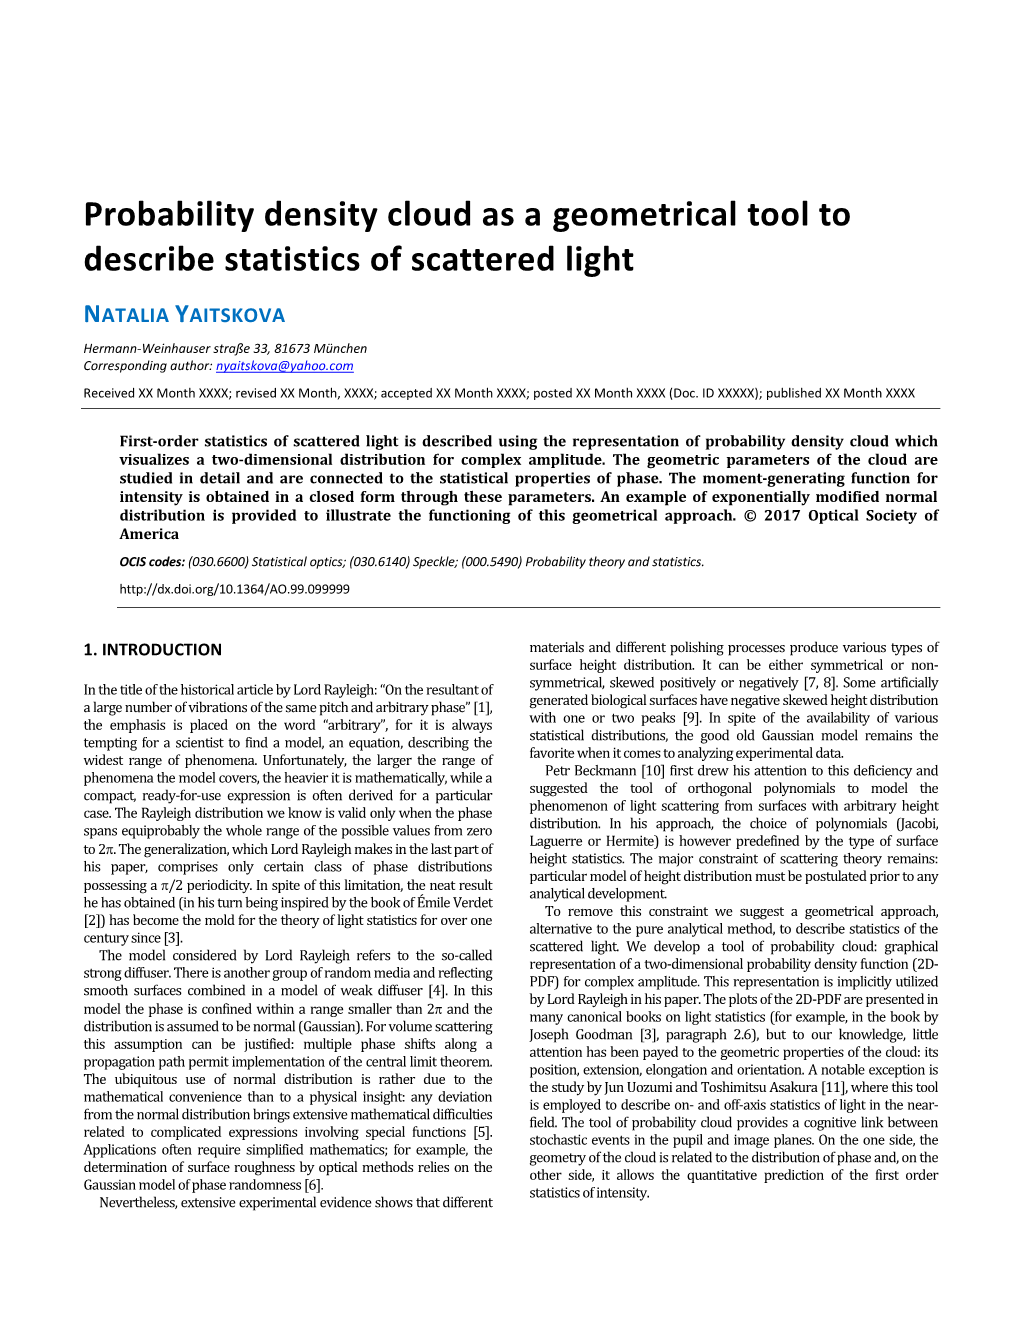 Probability Density Cloud As a Tool to Describe Statistics of Scattered Light